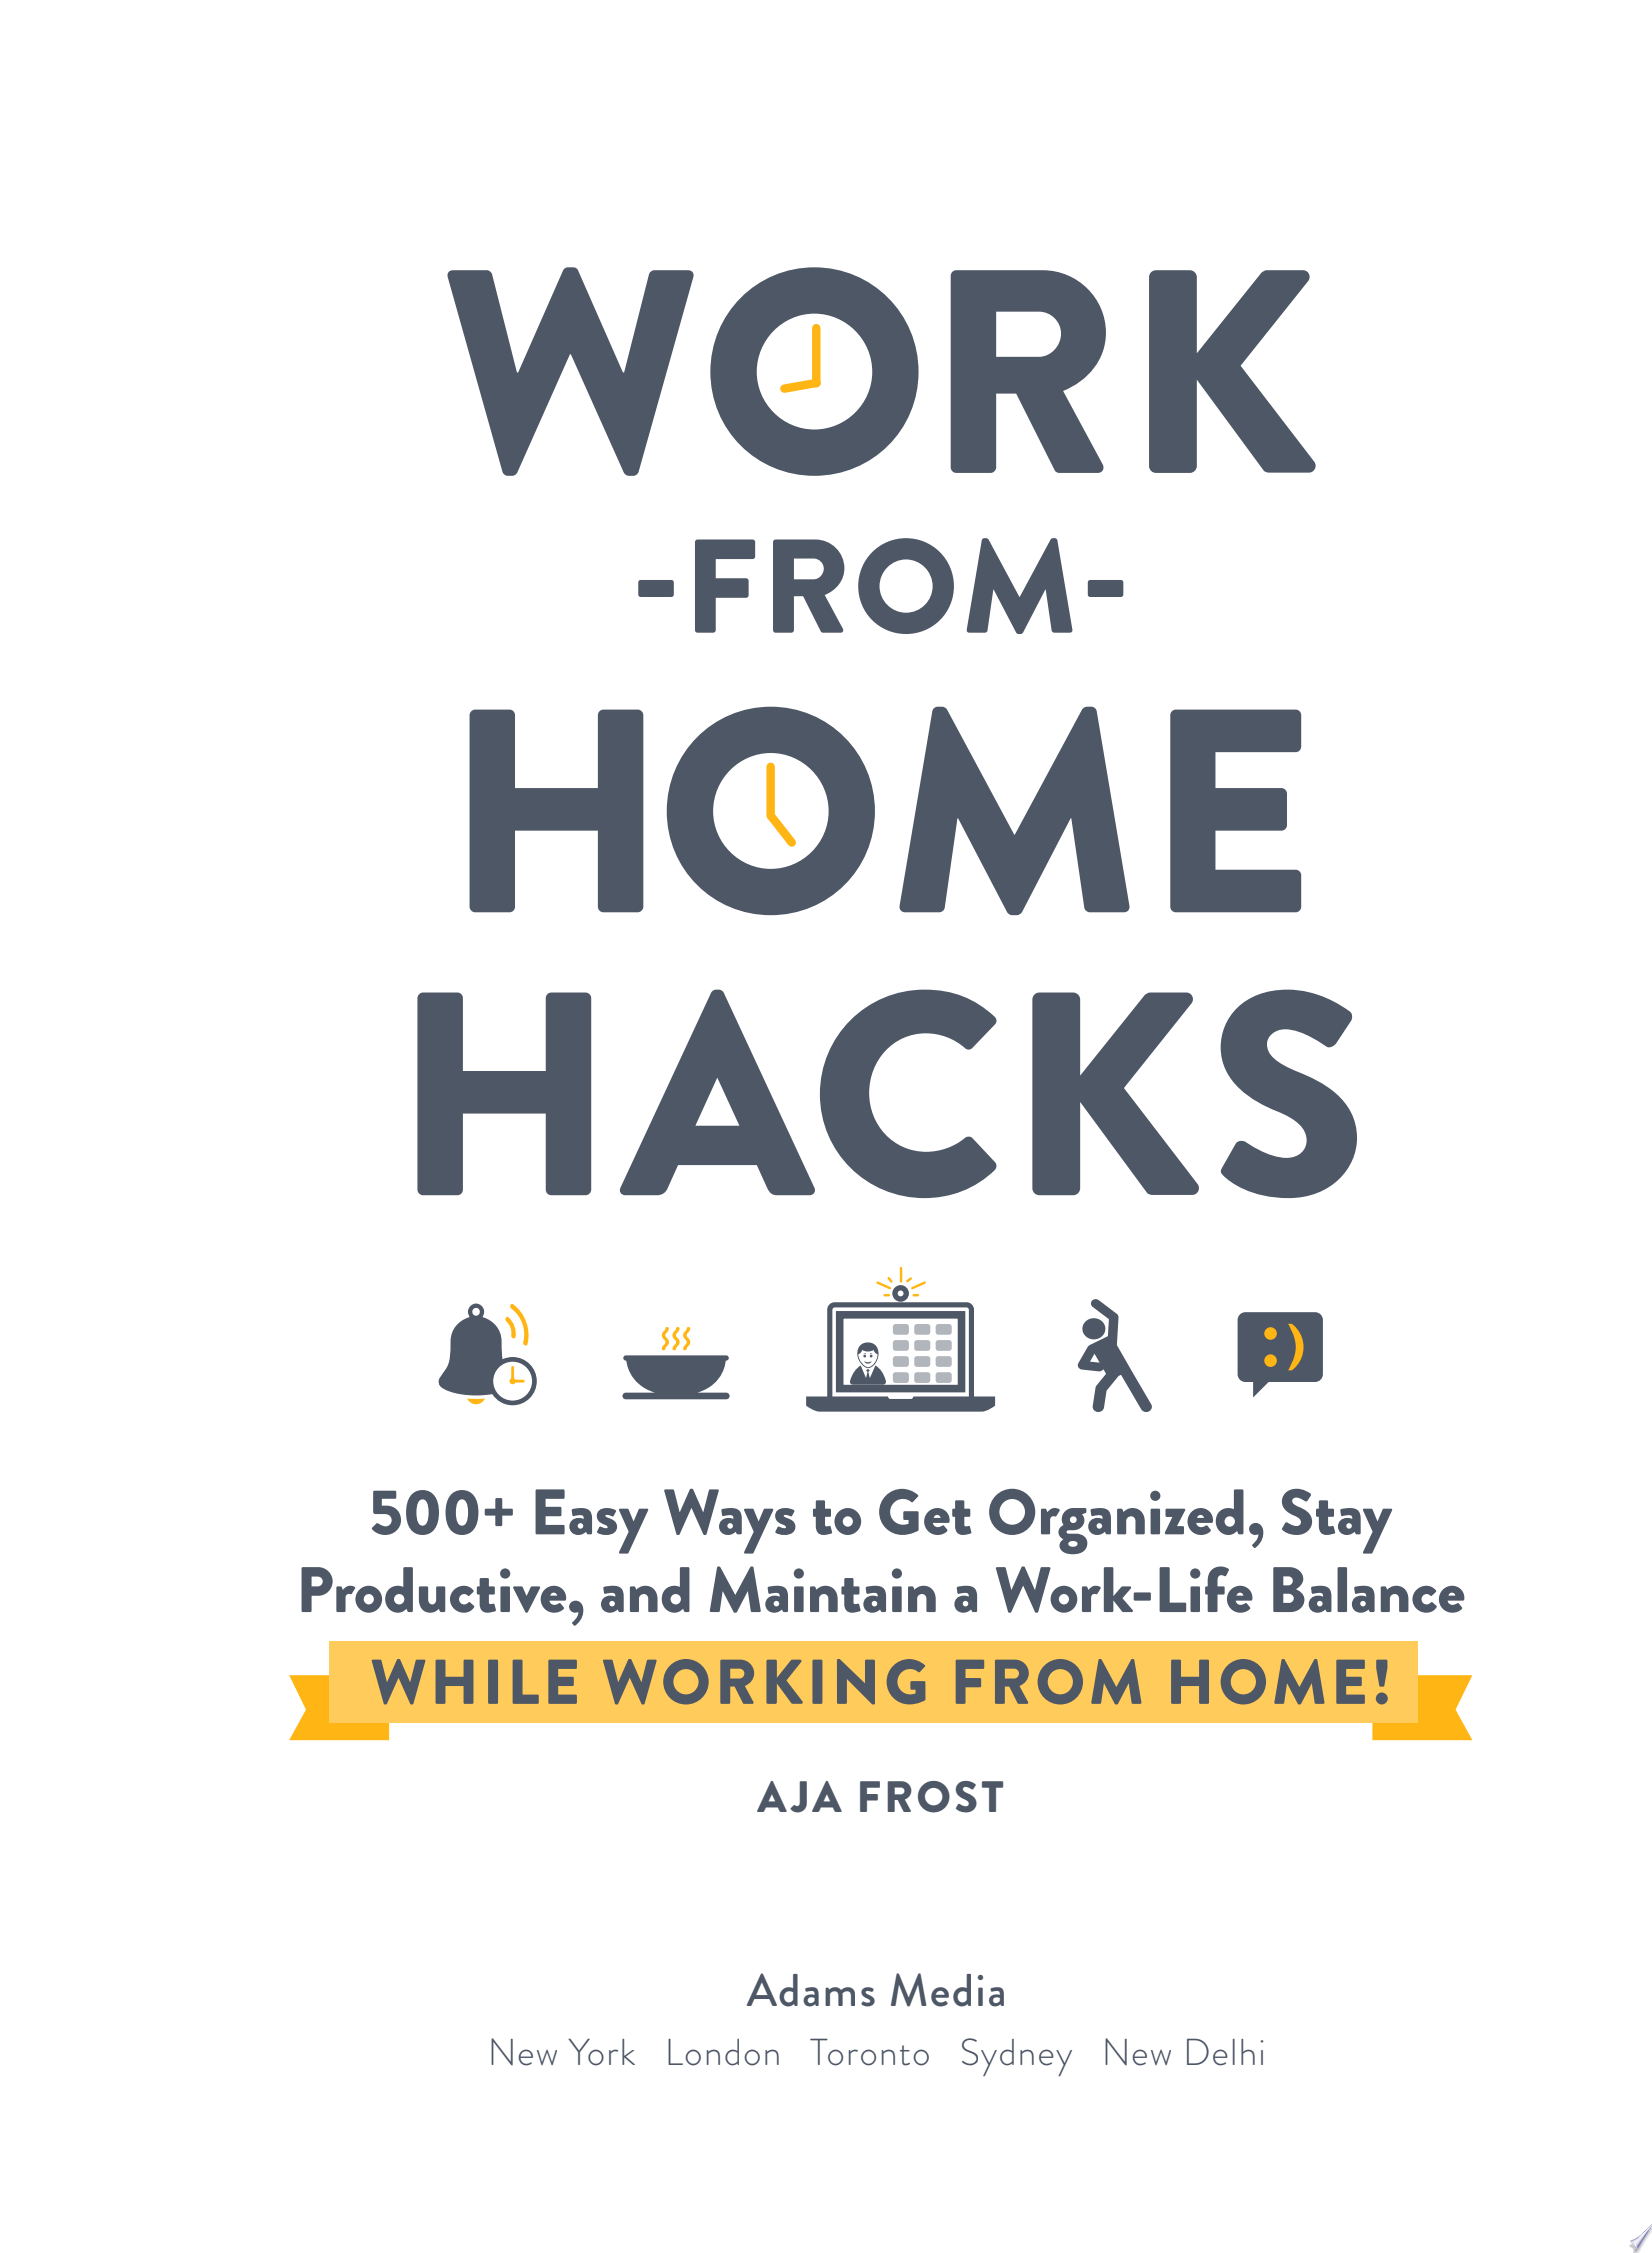 Image for "Work-from-Home Hacks"